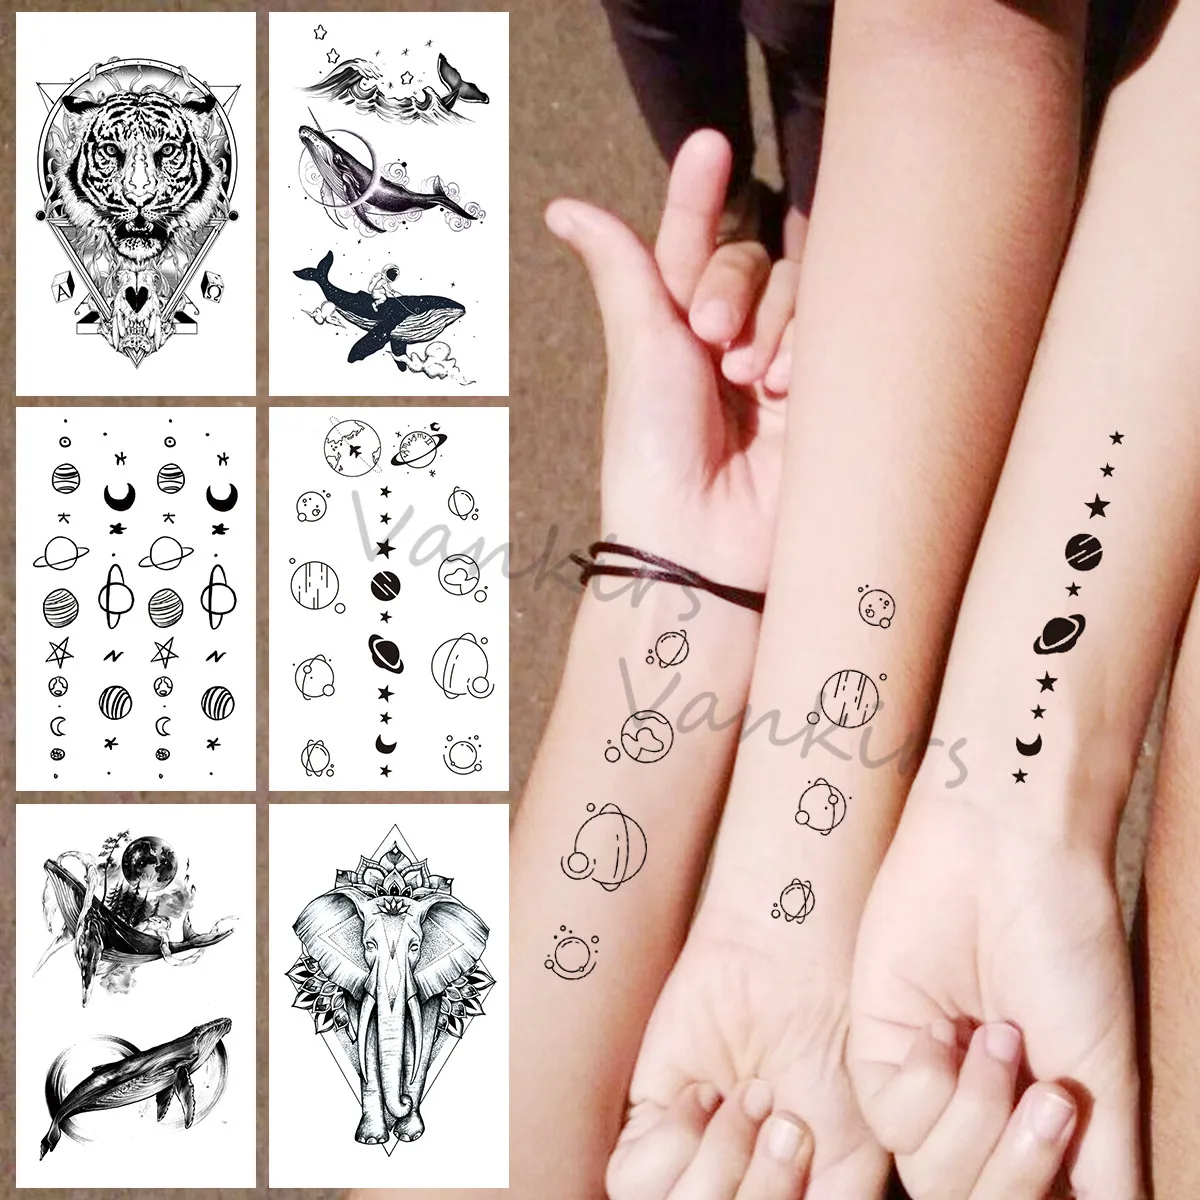 Minimalist Planet Universe Temporary Tattoos For Women Men Adult Realistic Tiger Whale Elephant Fake Tattoo Sticker